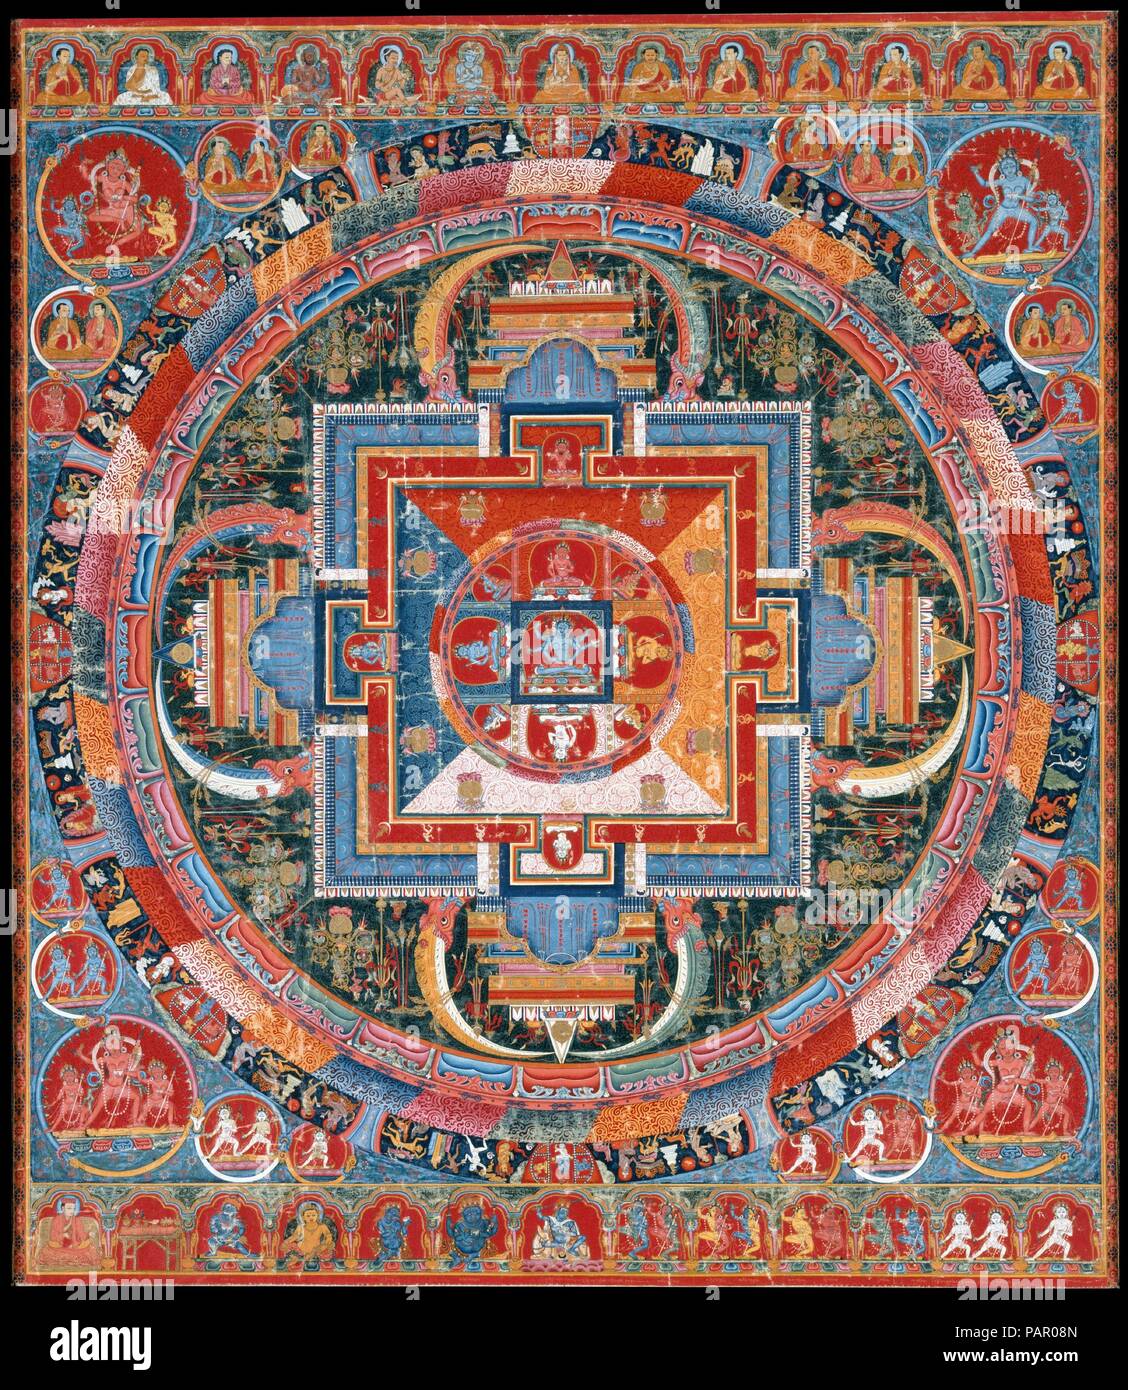 Mandala of Jnanadakini. Culture: Tibet. Dimensions: Image: 29 1/2 x 33 in. (74.9 x 83.8 cm)  with traditional textile mount: 54 1/8 x 36 1/4 in. (137.5 x 92.1 cm)  Framed: 49 1/2 in. × 37 13/16 in. × 1 in. (125.7 × 96 × 2.5 cm). Date: late 14th century.  The central six-armed goddess (devi), Jnanadakini, is surrounded by eight emanations--representations of the devi that correspond to the colors of the mandala's four directional quadrants. Four additional protective goddesses sit within the gateways. Surrounding the mandala are concentric circles that contain lotus petals, vajras, flames, and  Stock Photo